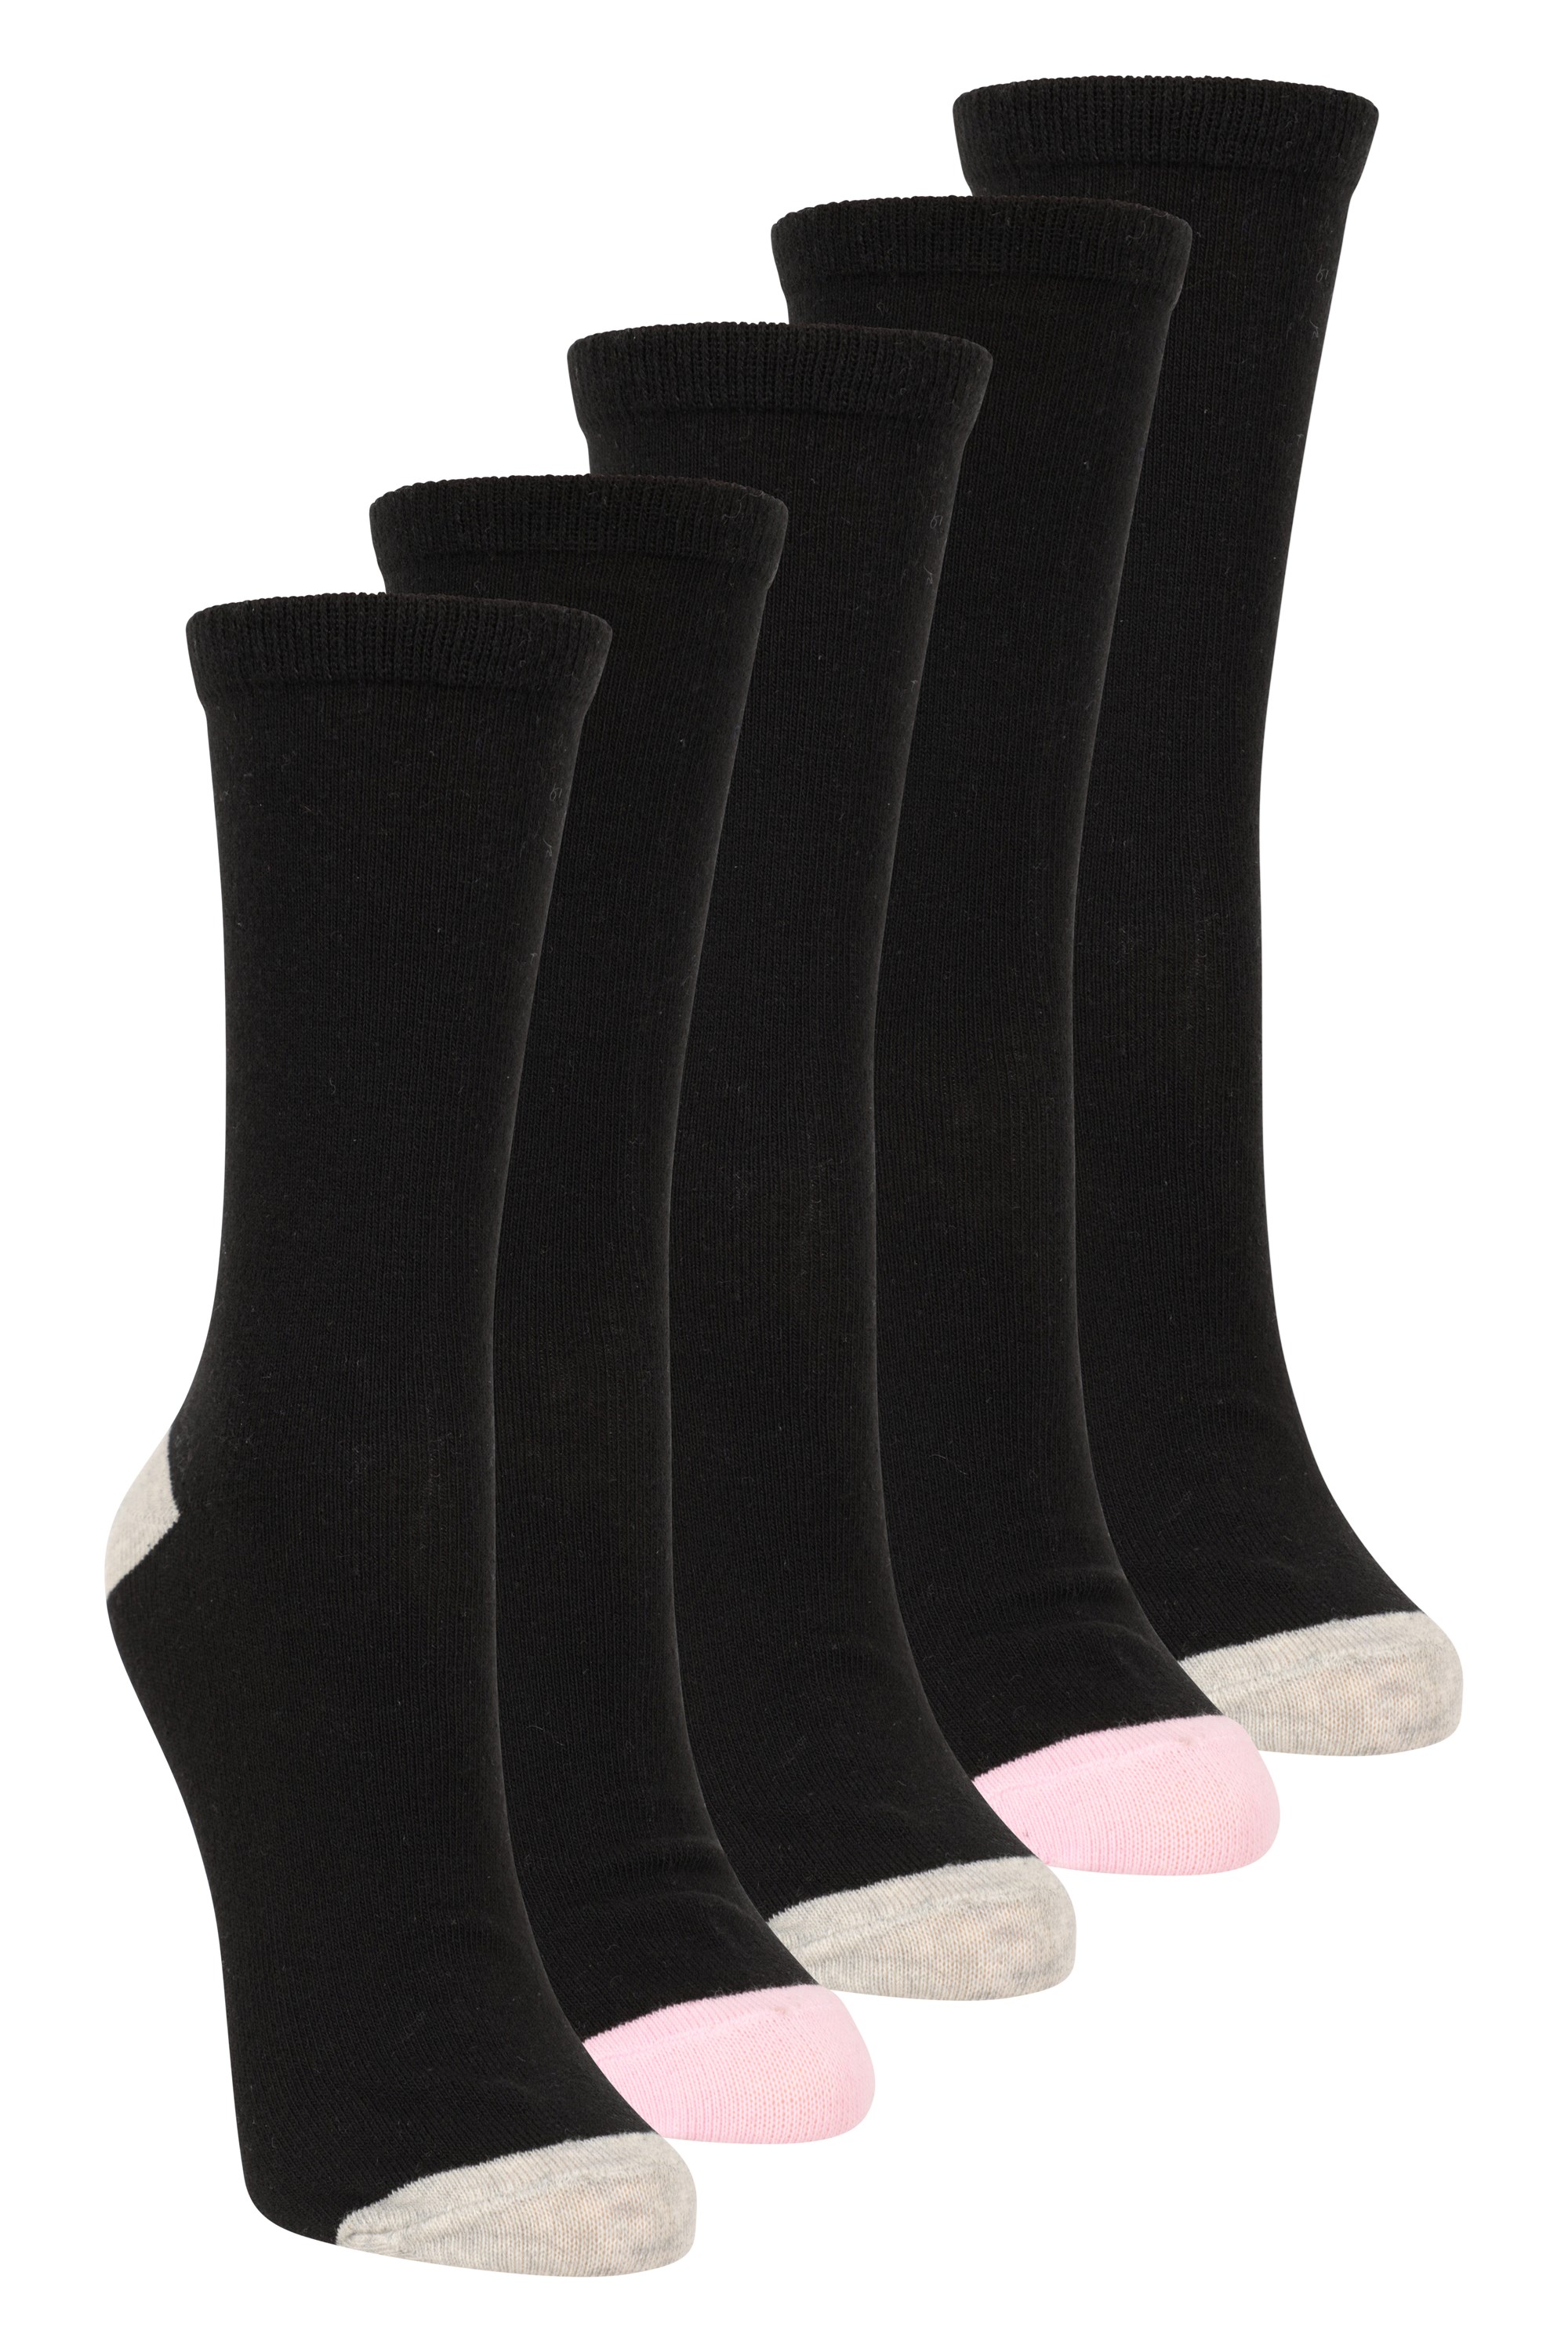 Womens Everyday Socks With Odour Control 5-pack - Black